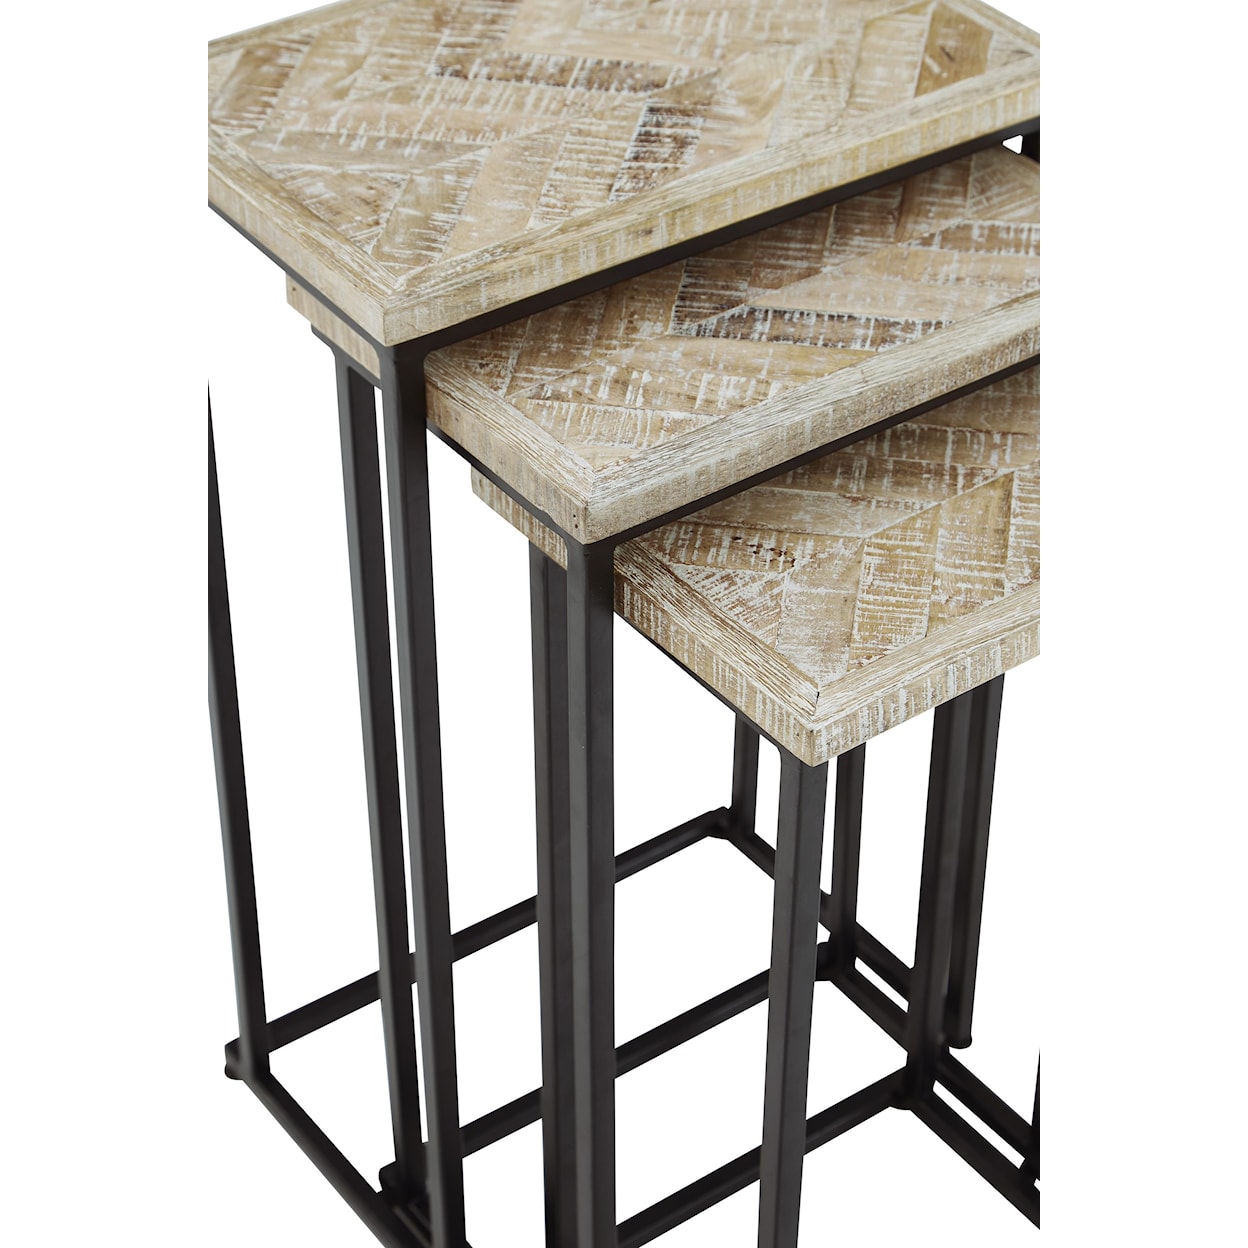 Signature Design by Ashley Cainthorne Nesting Tables (Set of 3)